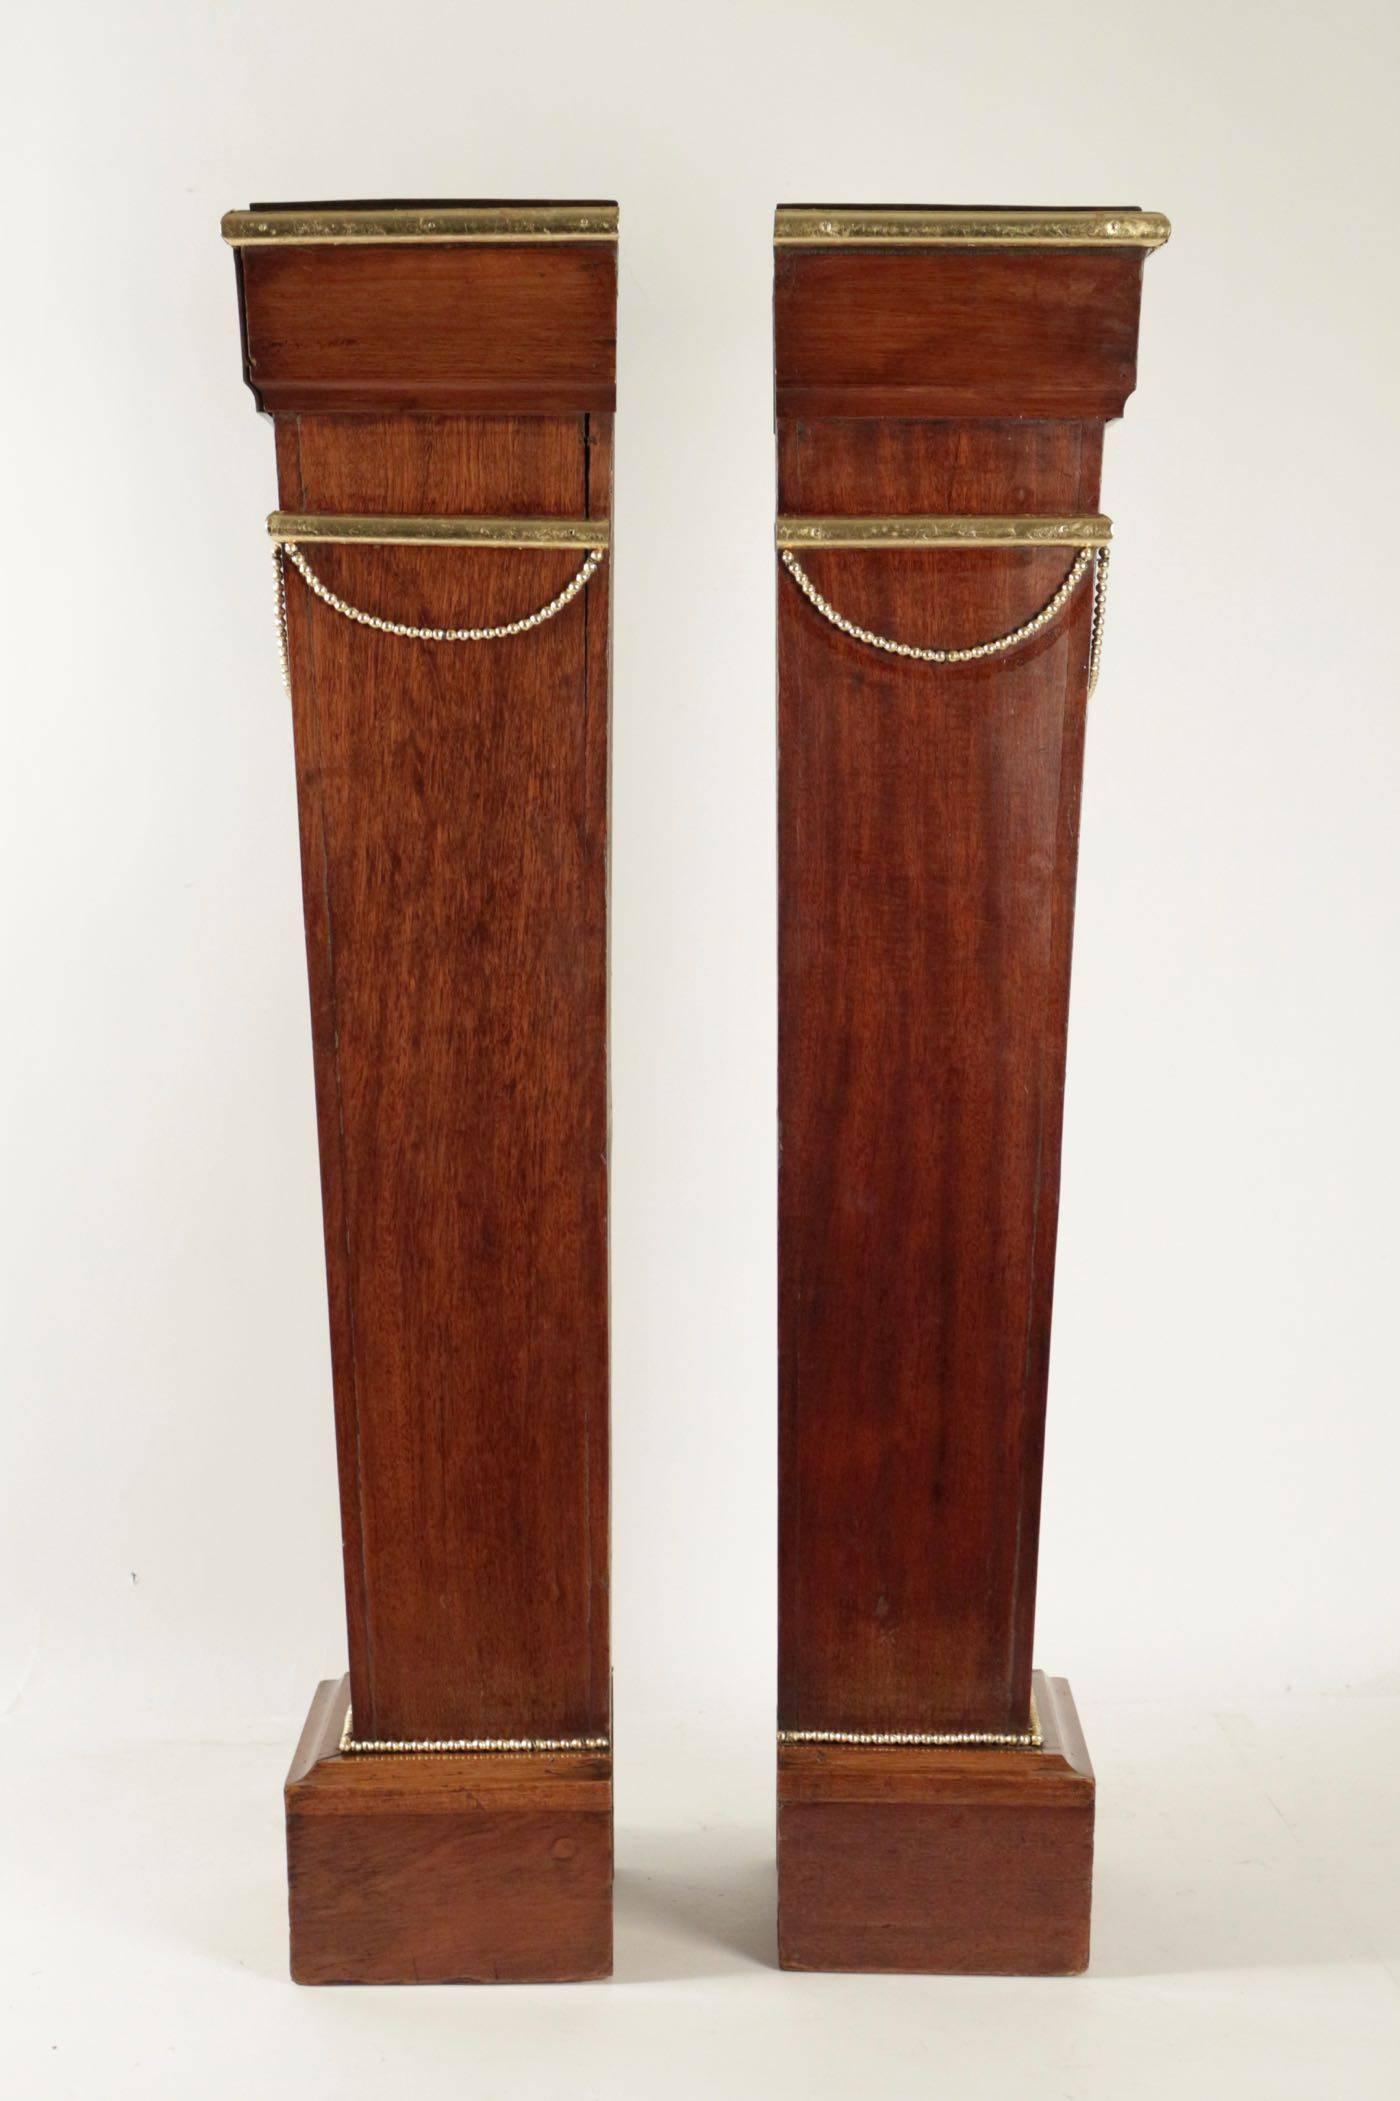 Pair of Sheaths, Consoles, Mahogany, Golden at the Gold Leaf, 19th Century For Sale 1